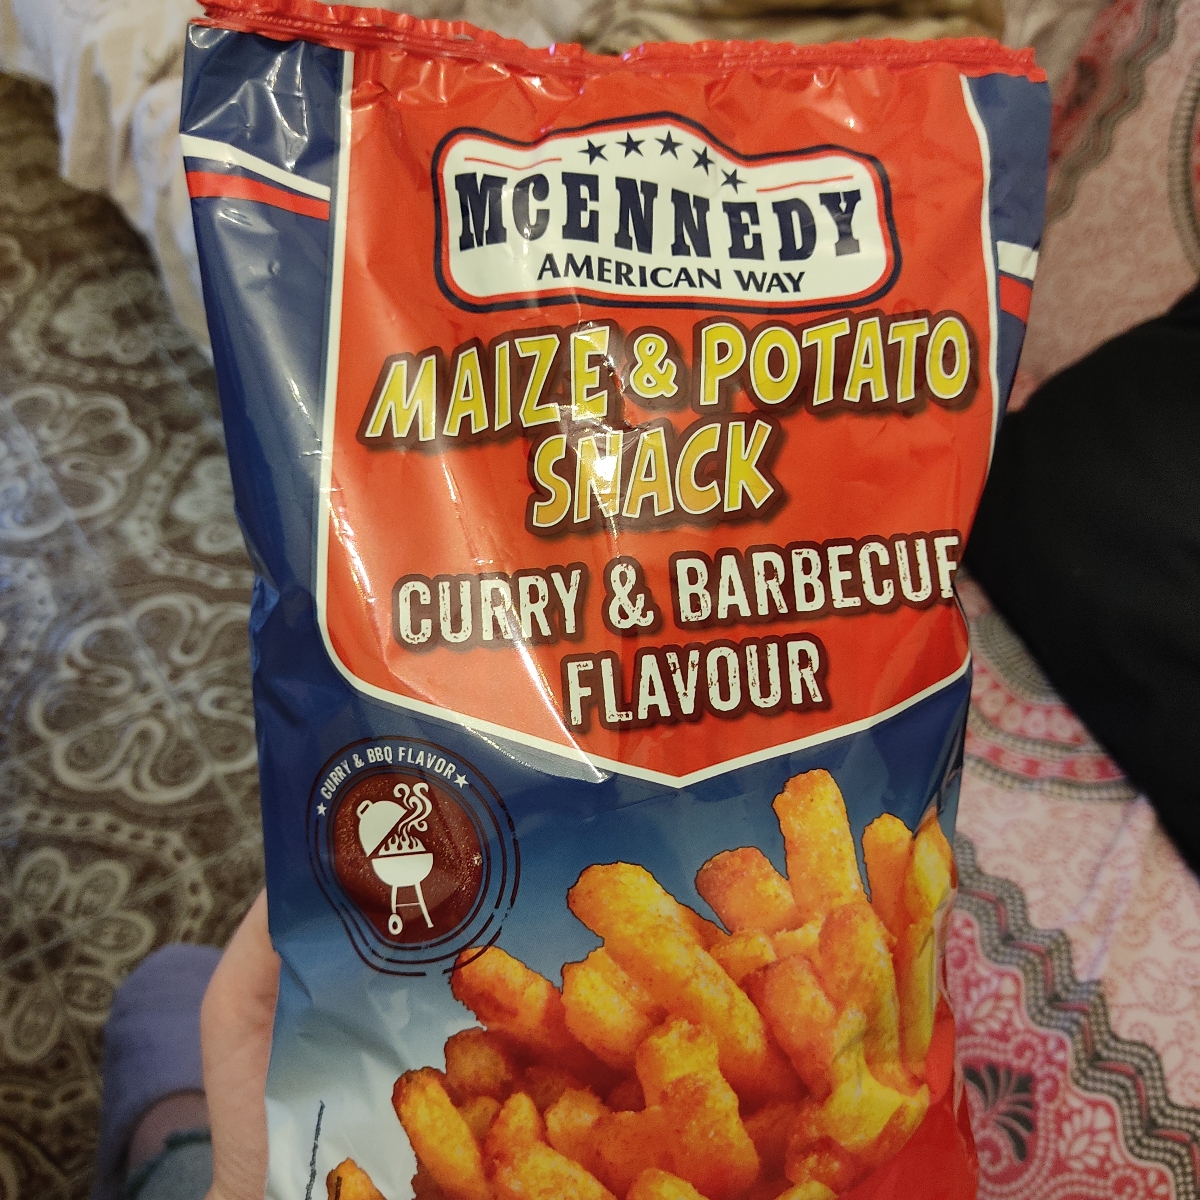 Mcennedy Maize abillion Curry | snack Reviews and Barbecue flavor potato and